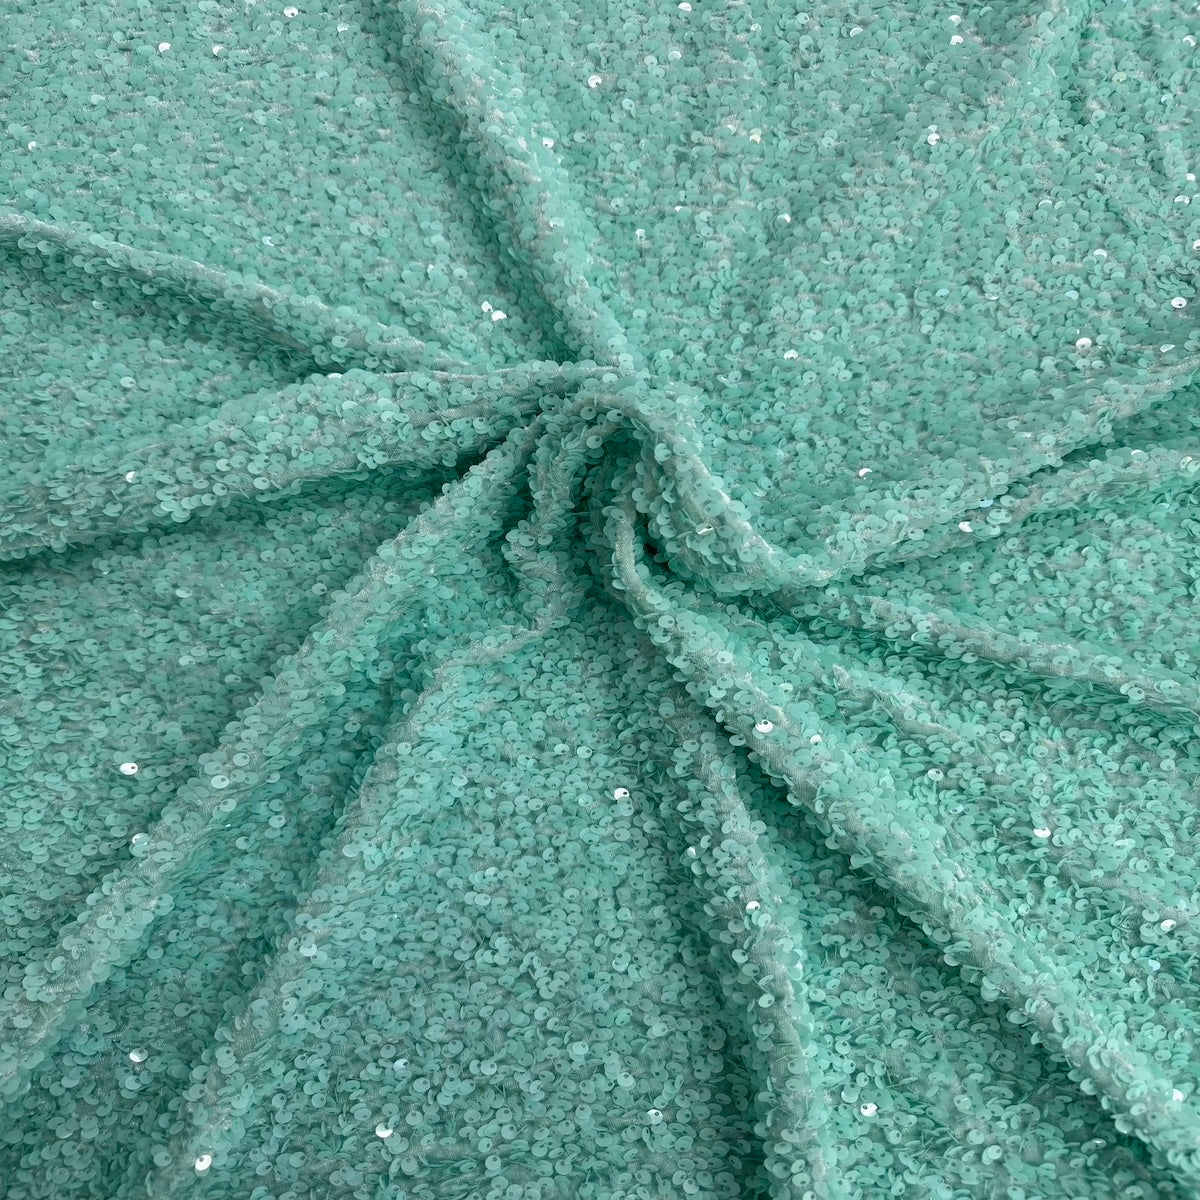 Mist Green Sequins Embroidered Stretch Velvet Rodeo Fabric